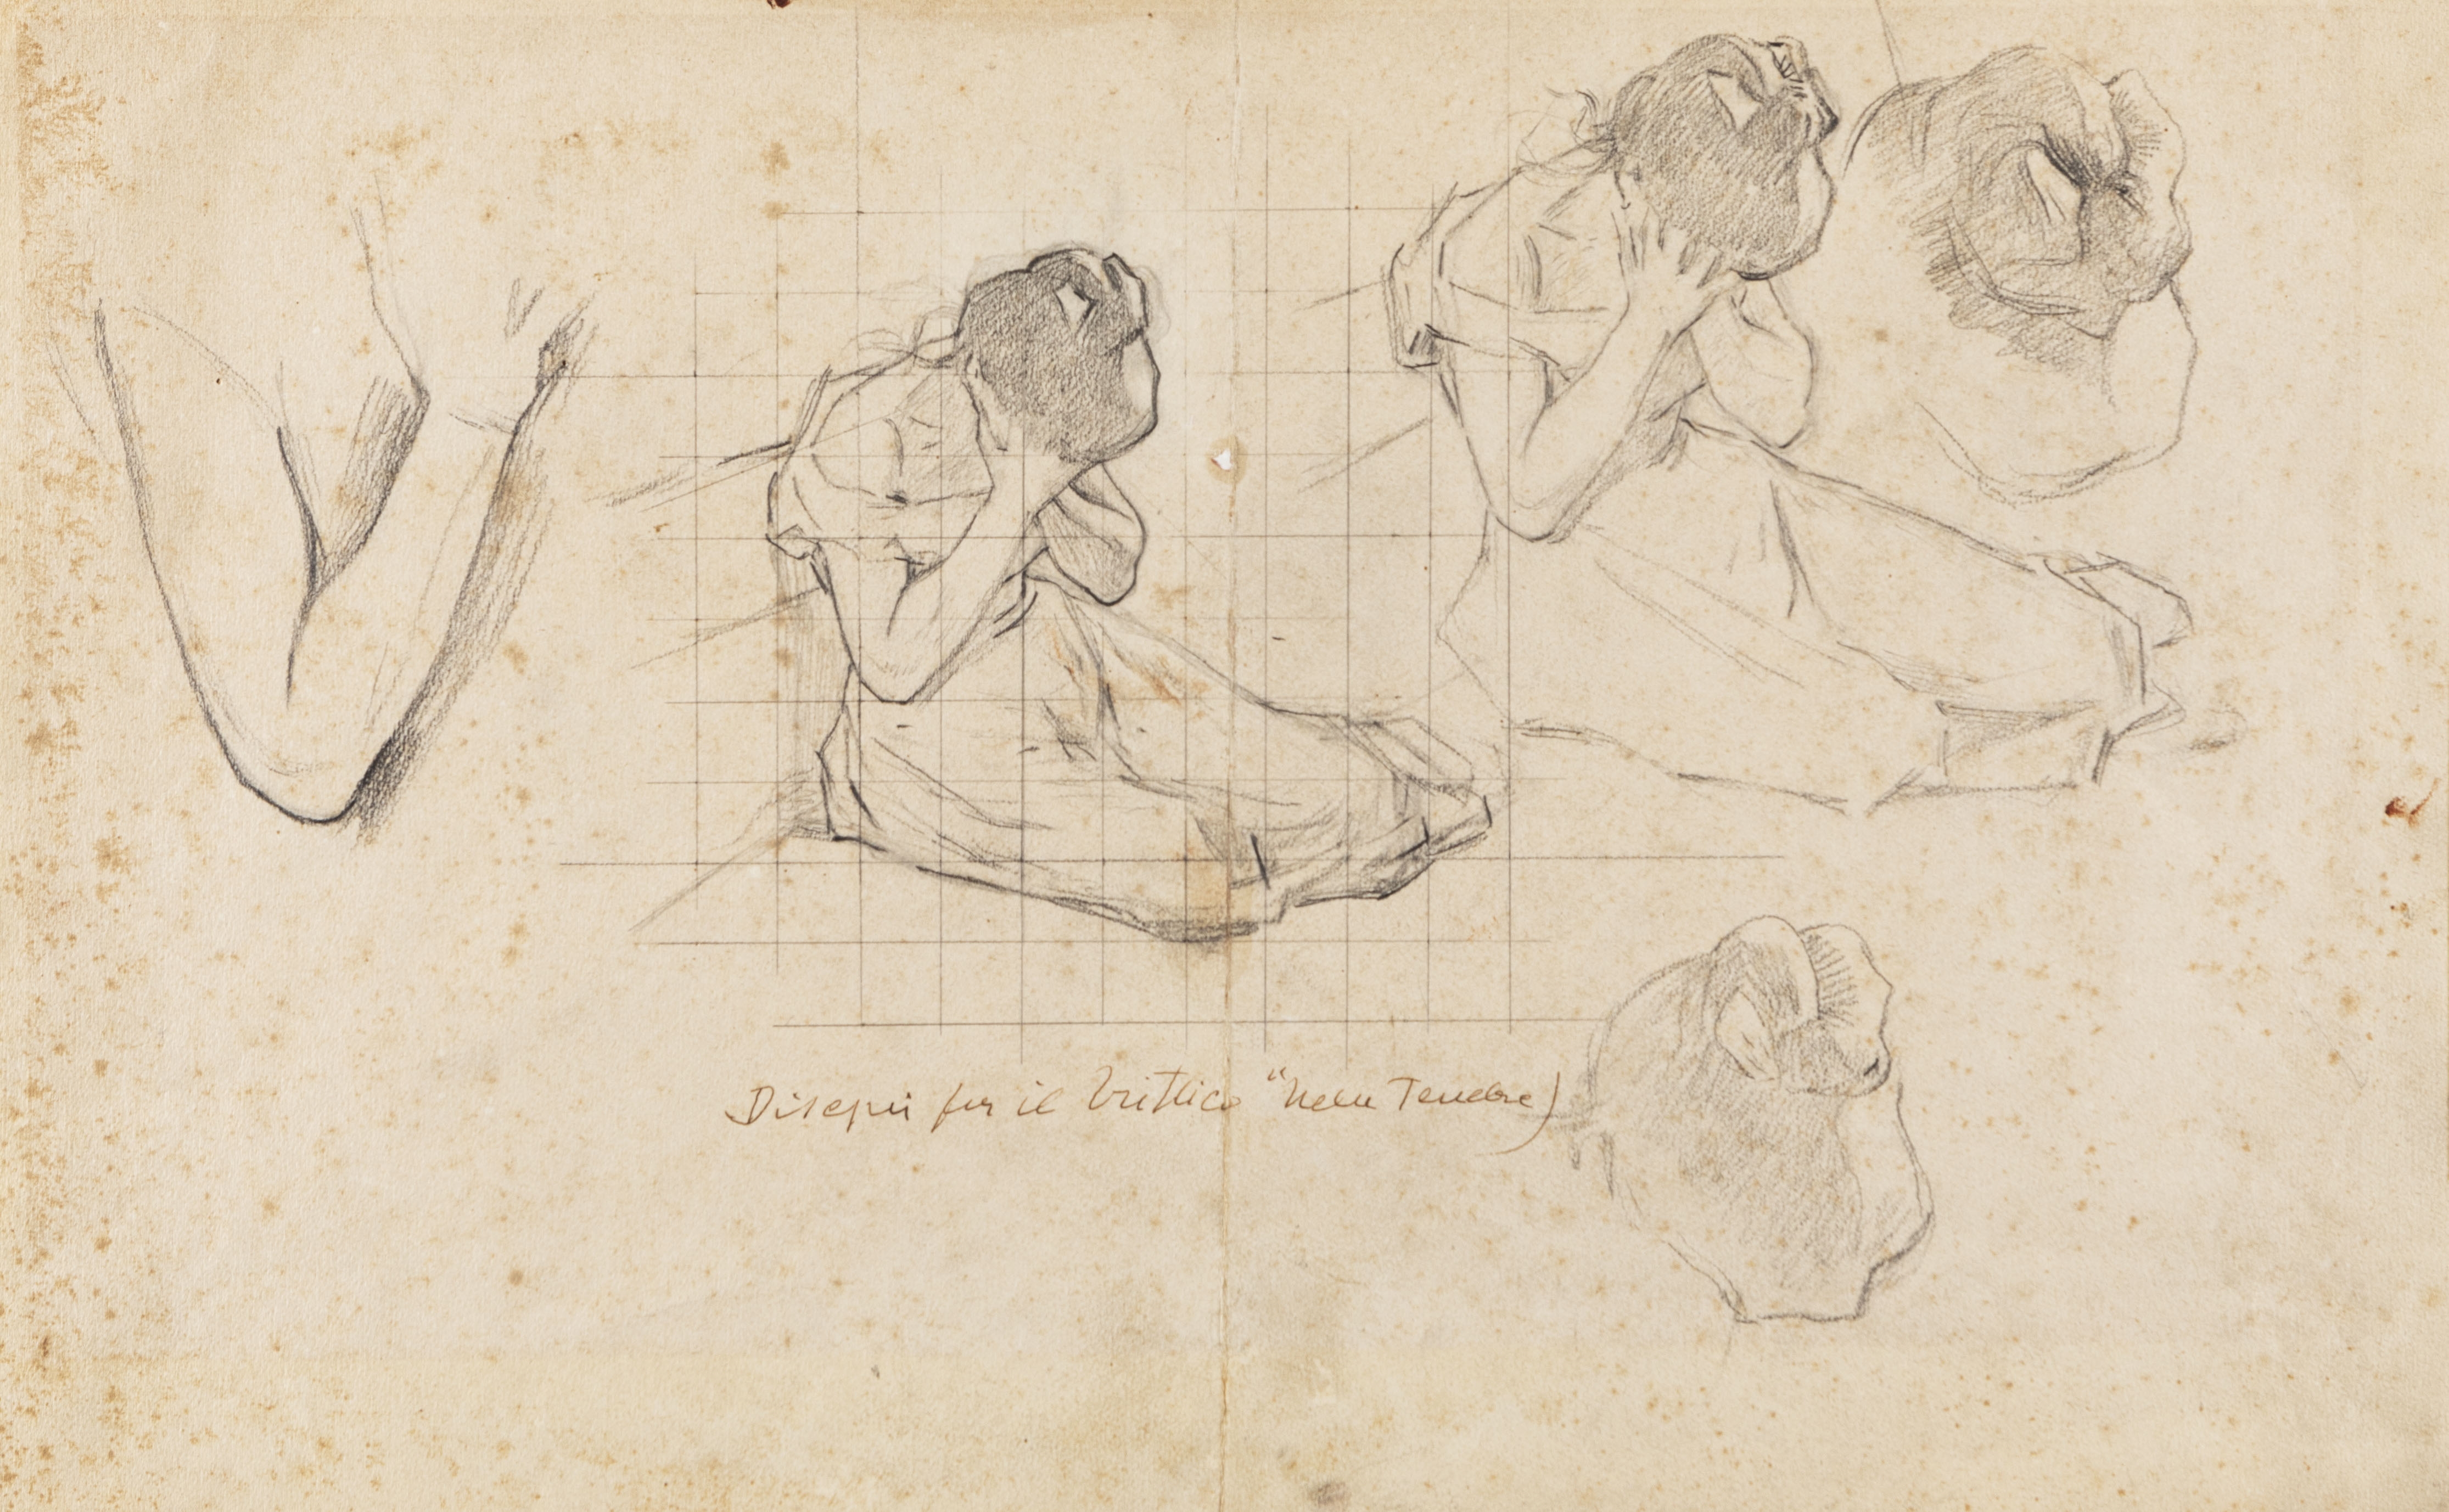 Pair of preparatory studies for the triptych "In the darkness" by Silvio Giulio Rotta